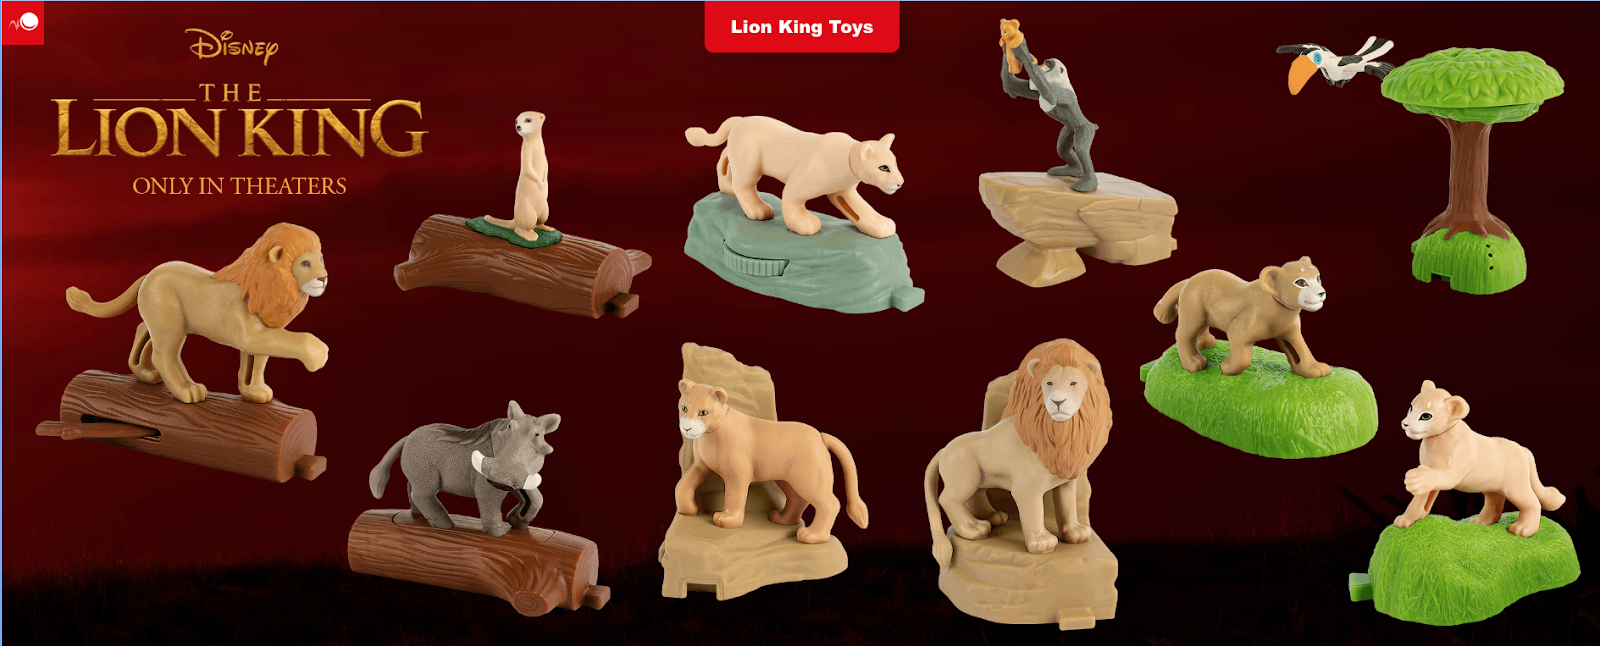 2019 McDONALD'S DISNEY'S THE LION KING HAPPY MEAL TOYS Get The COMPLETE Set!